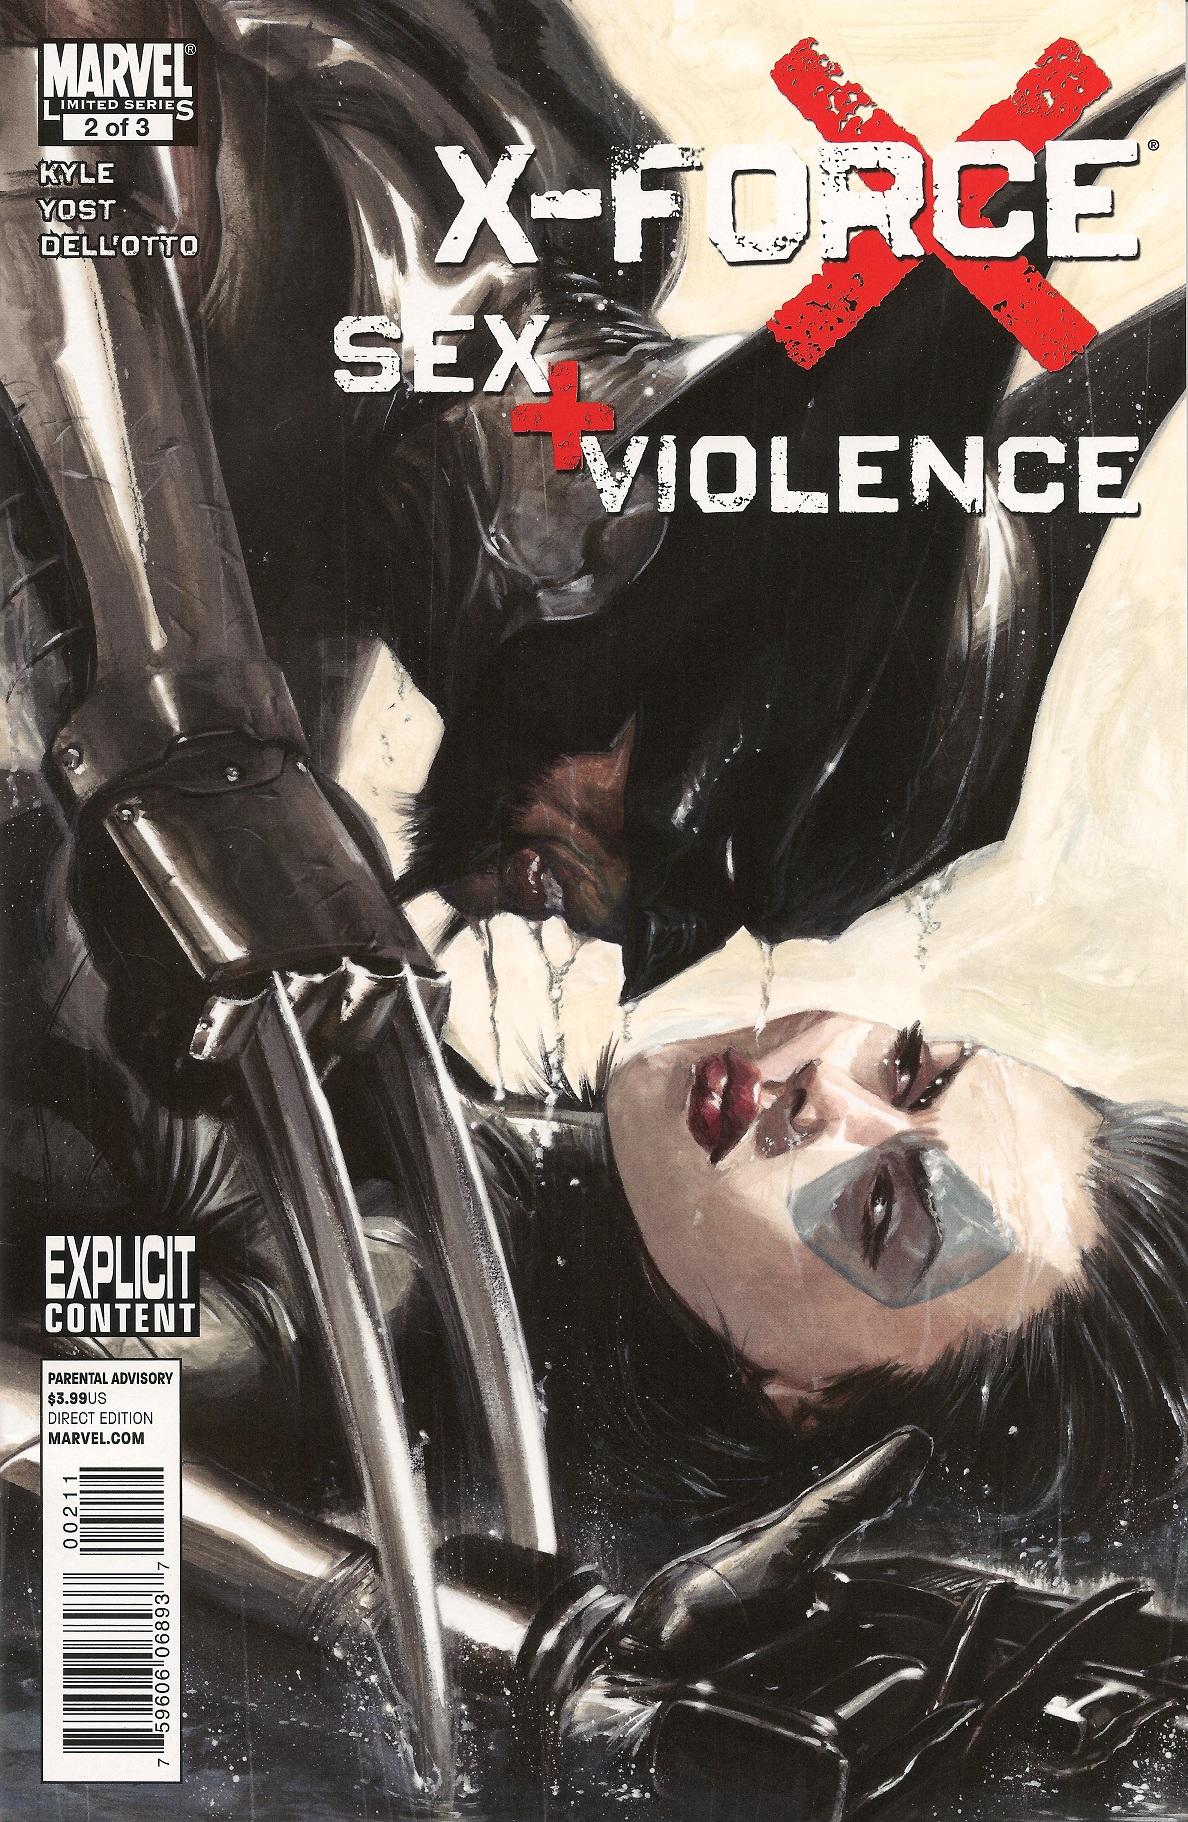 X-Force: Sex and Violence Vol. 1 #2